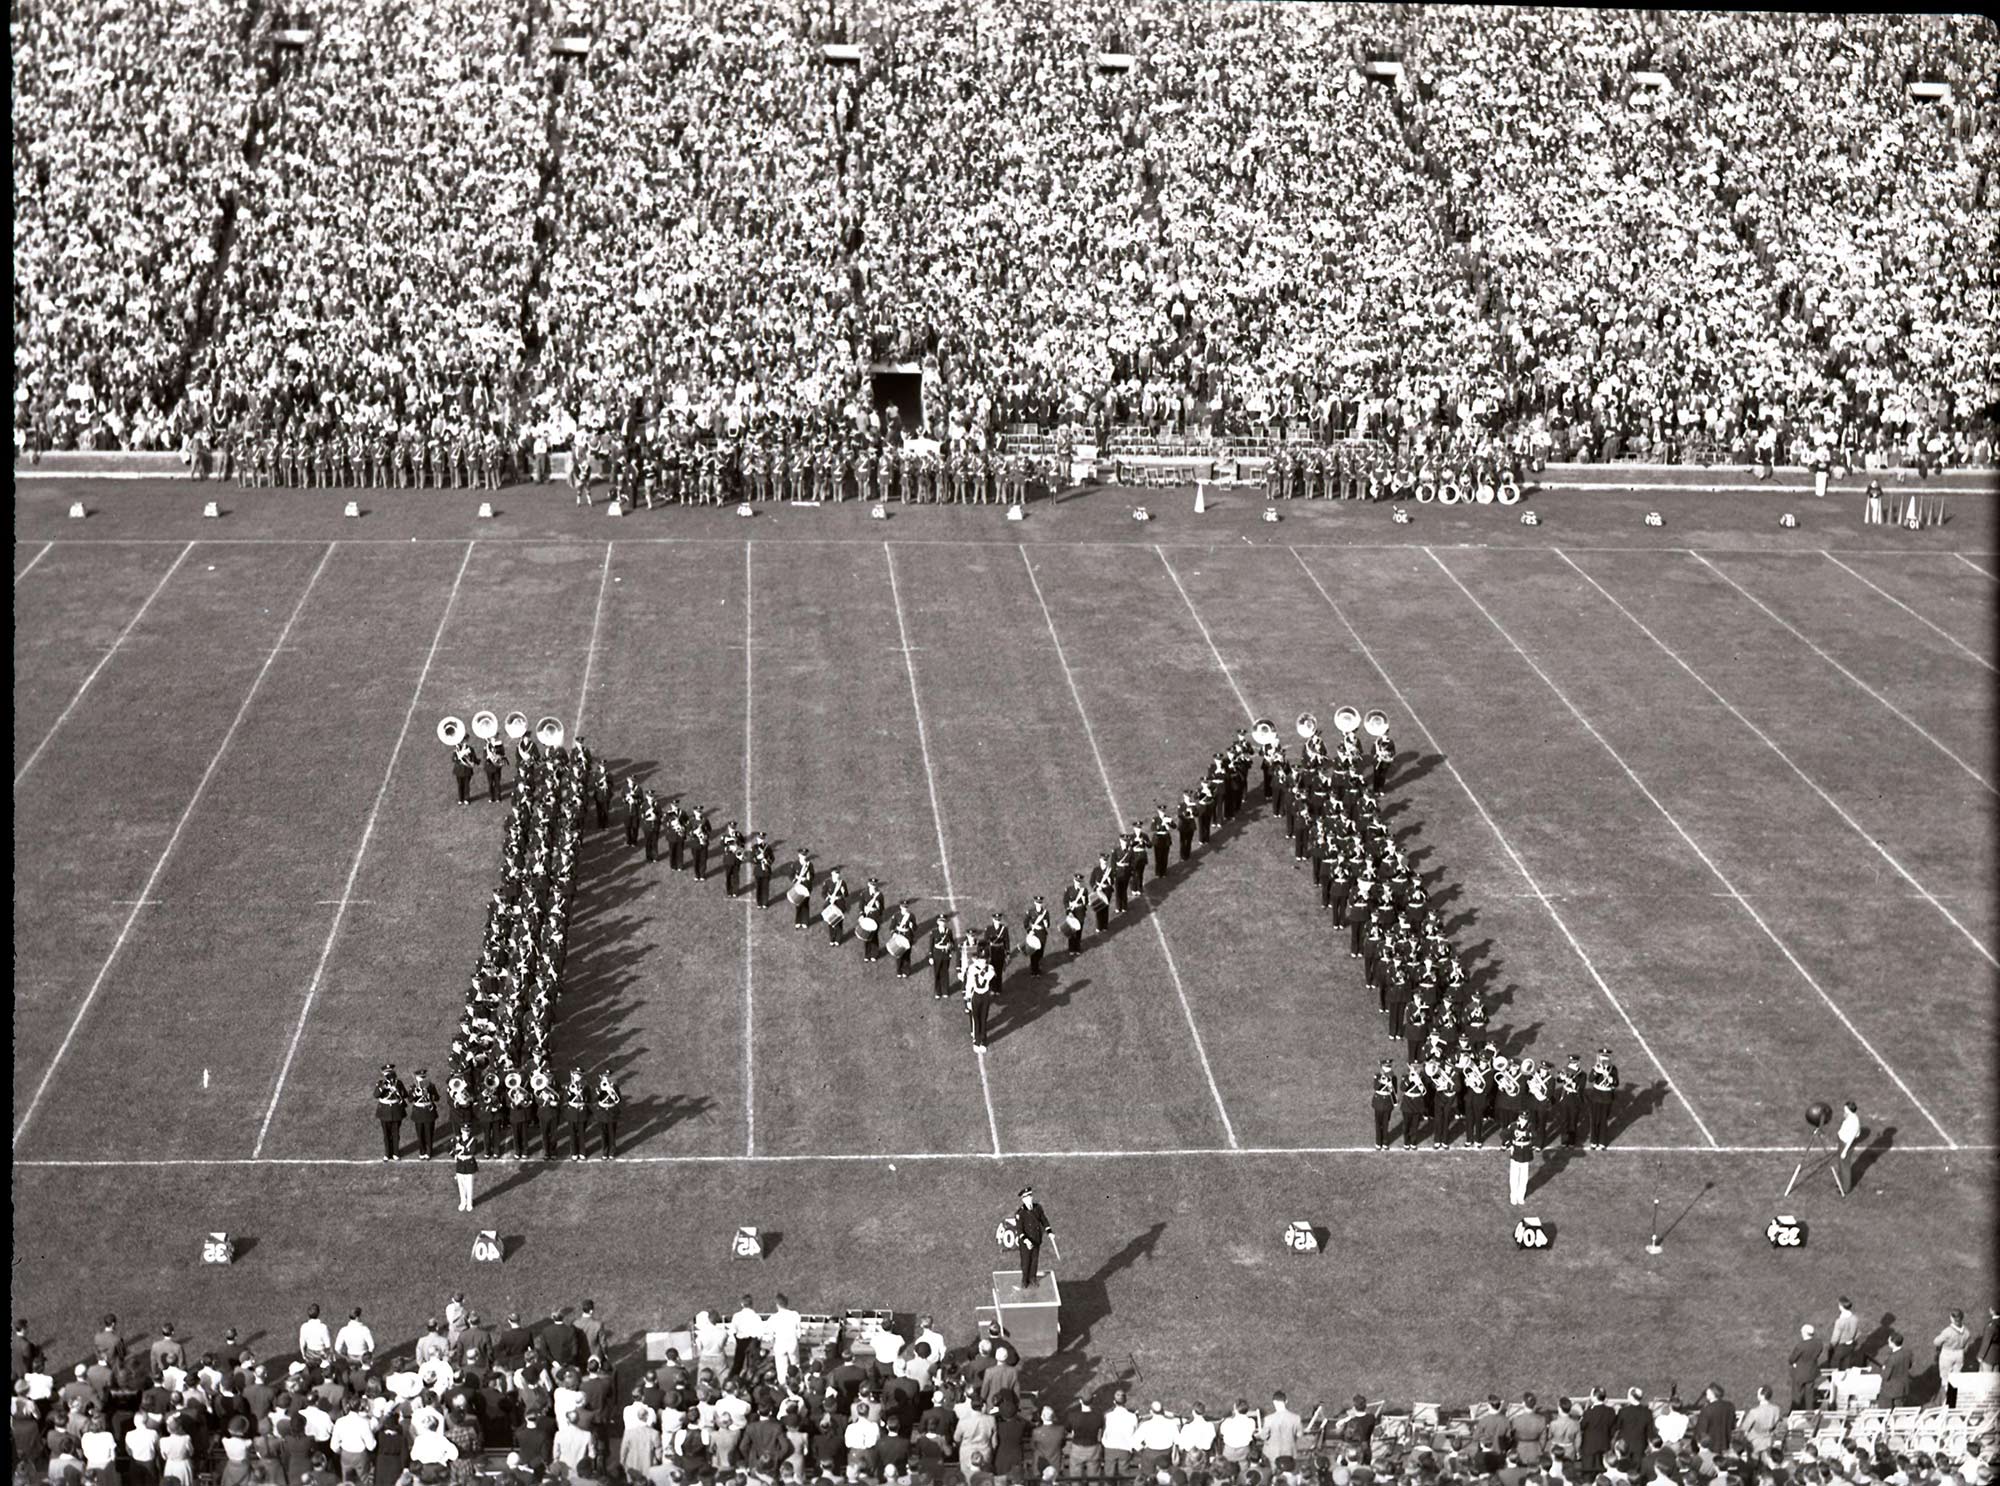 U-M Marching Band forming the Block M at the U-M vs. Michigan State football game on October 5, 1940.